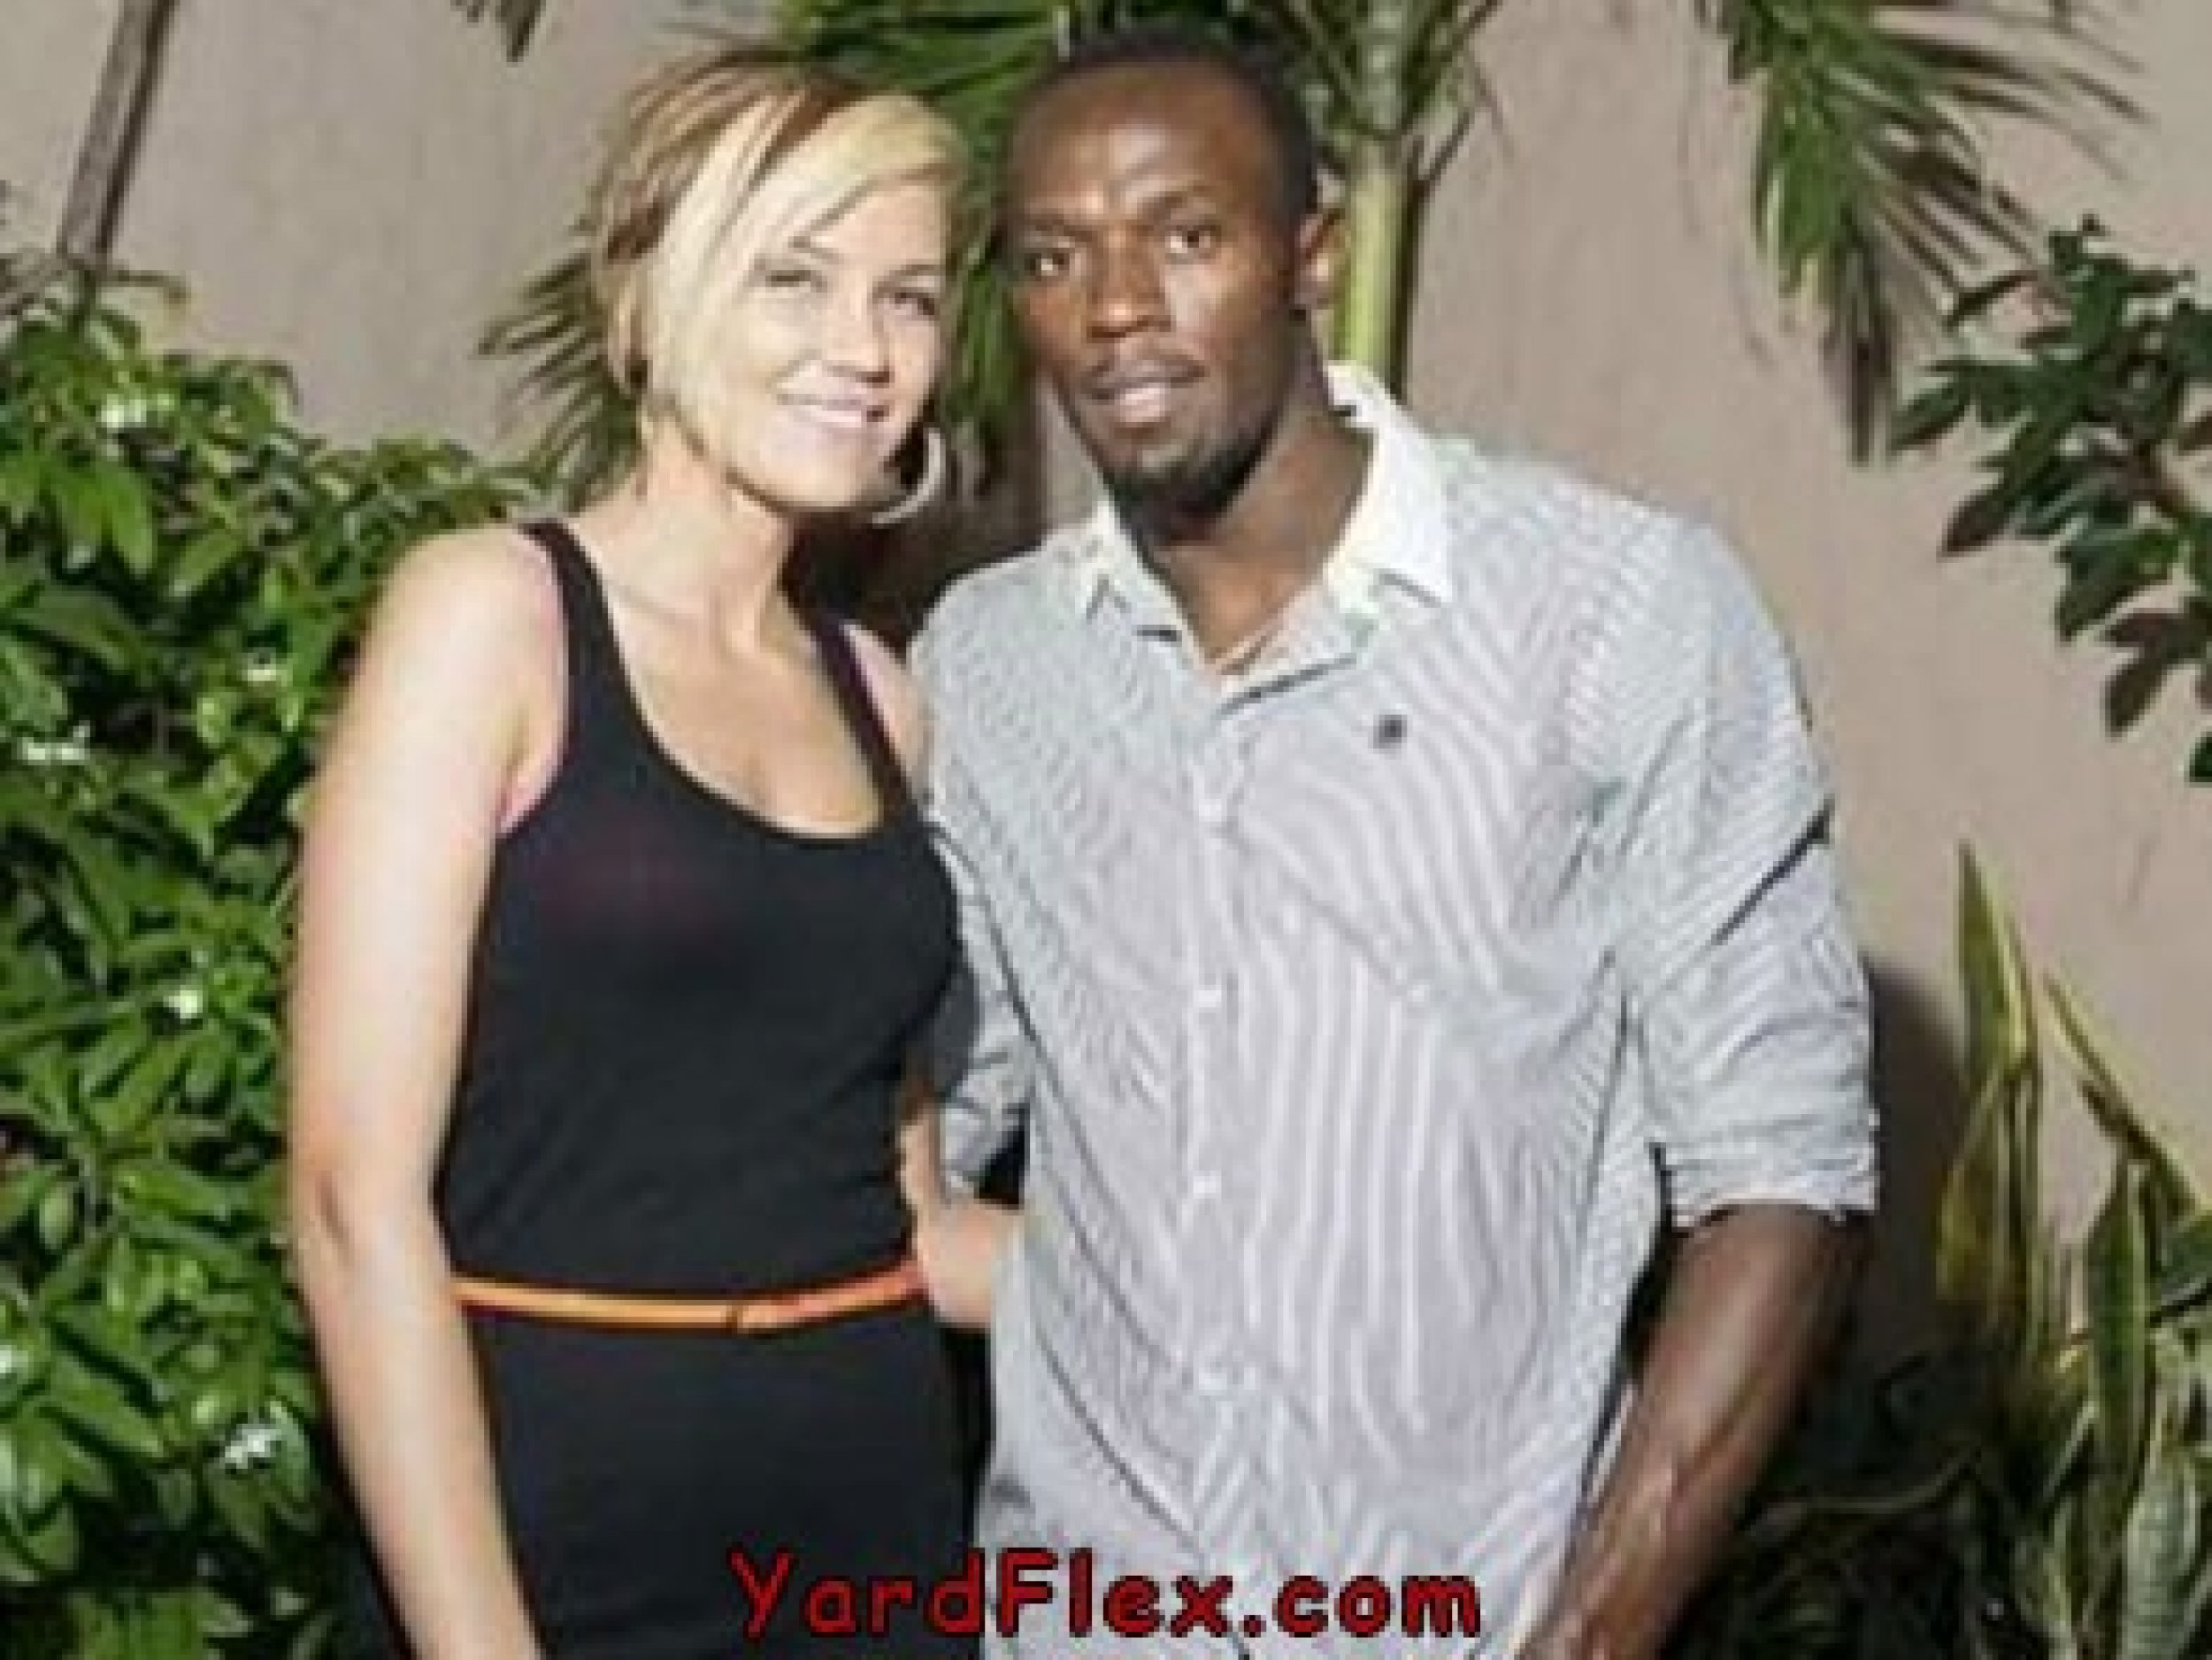 Bolt and Slovak dated for six months before he ended the relationship in order to prepare for the Olympics.